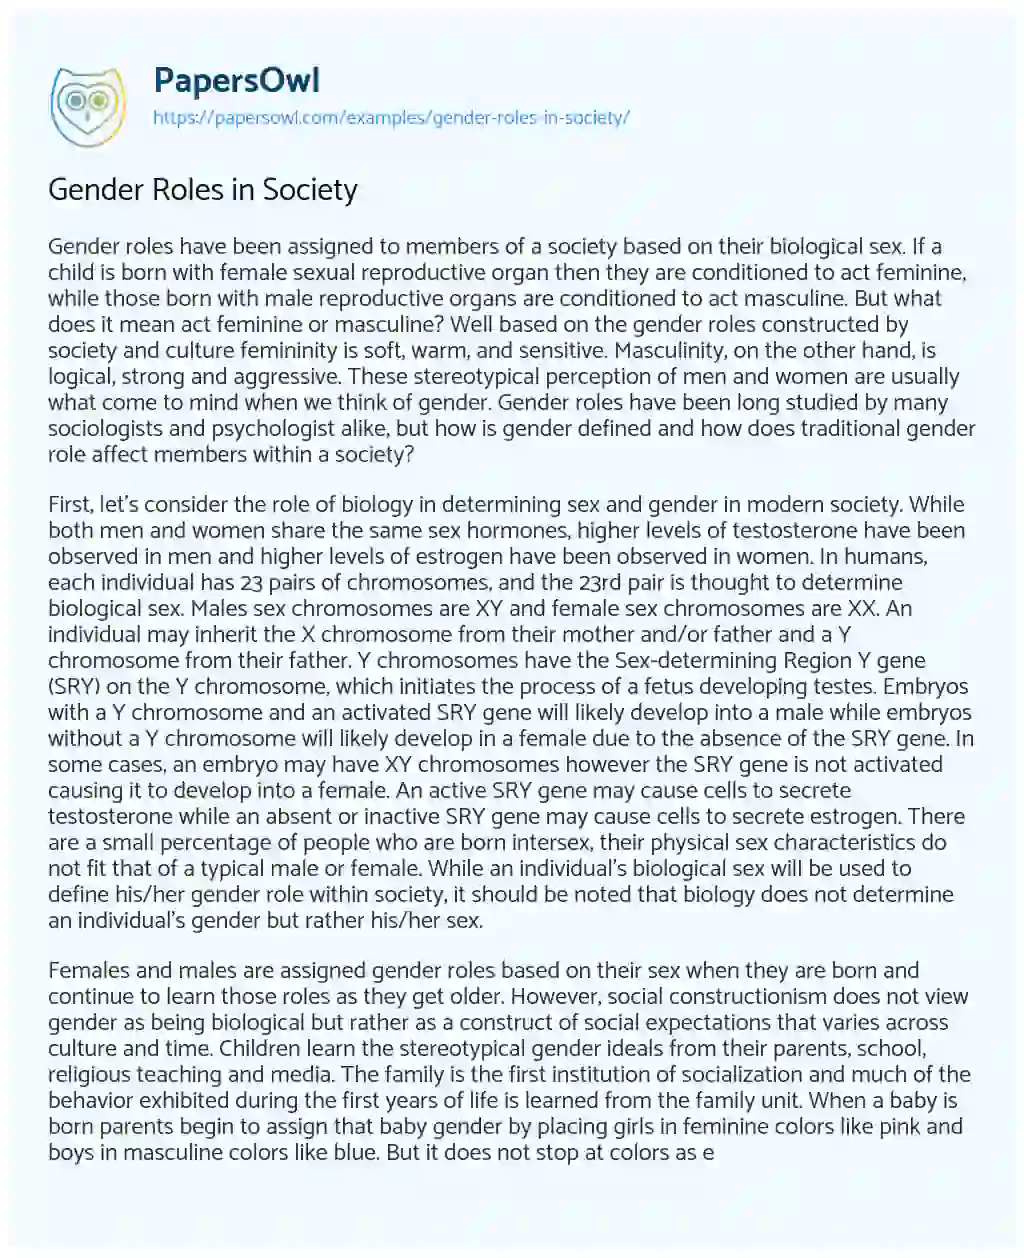 Essay on Gender Roles in Society